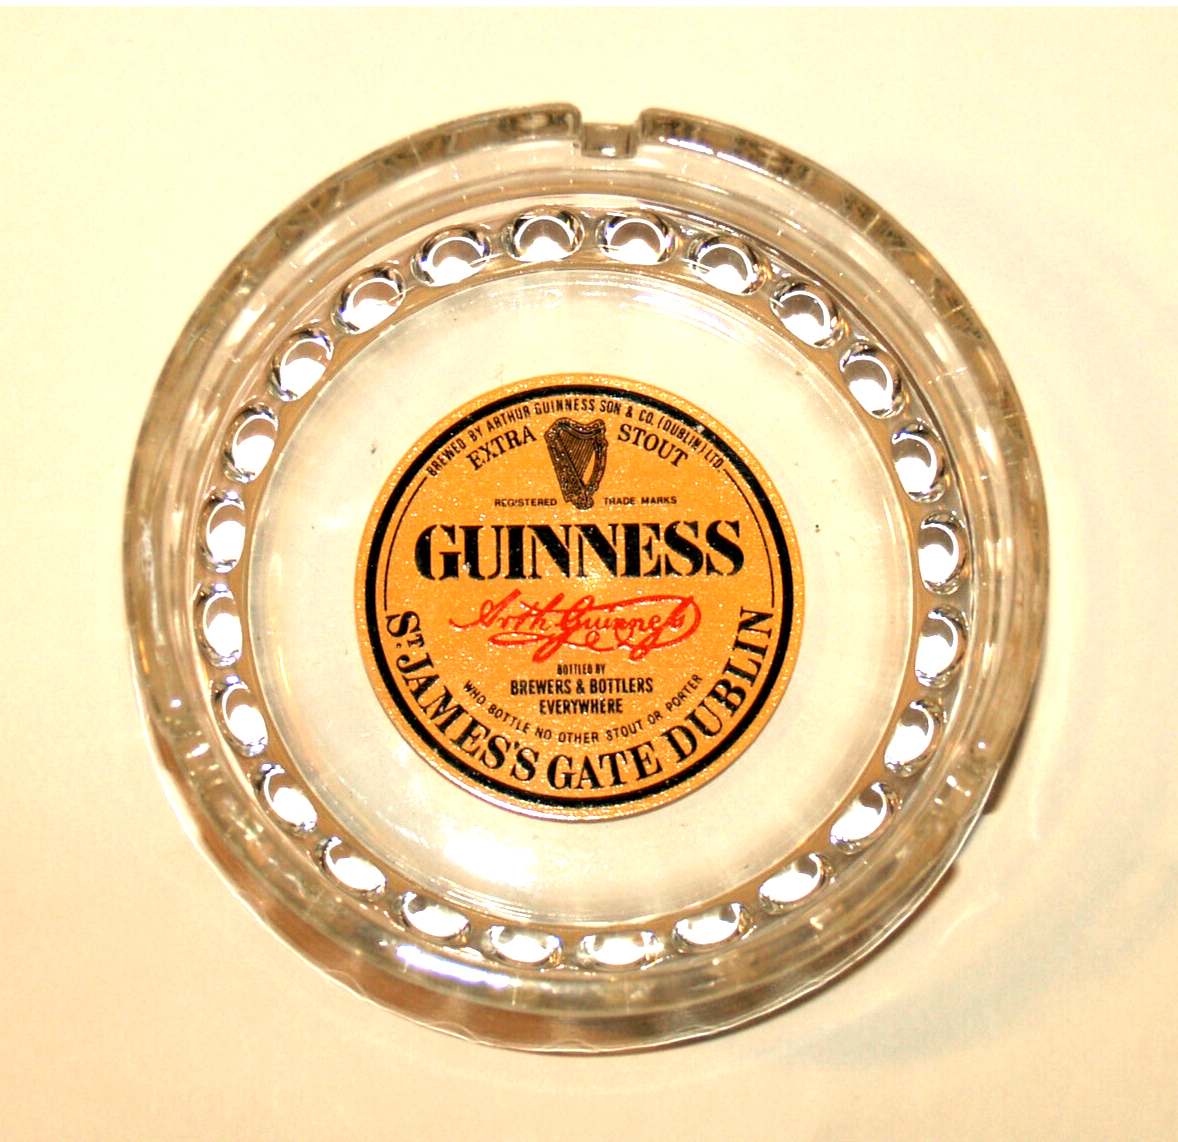 Primary image for GUINNESS St. JAMES'S GATE DUBLIN Painted Label Glass Ashtray REIMS FRANCE